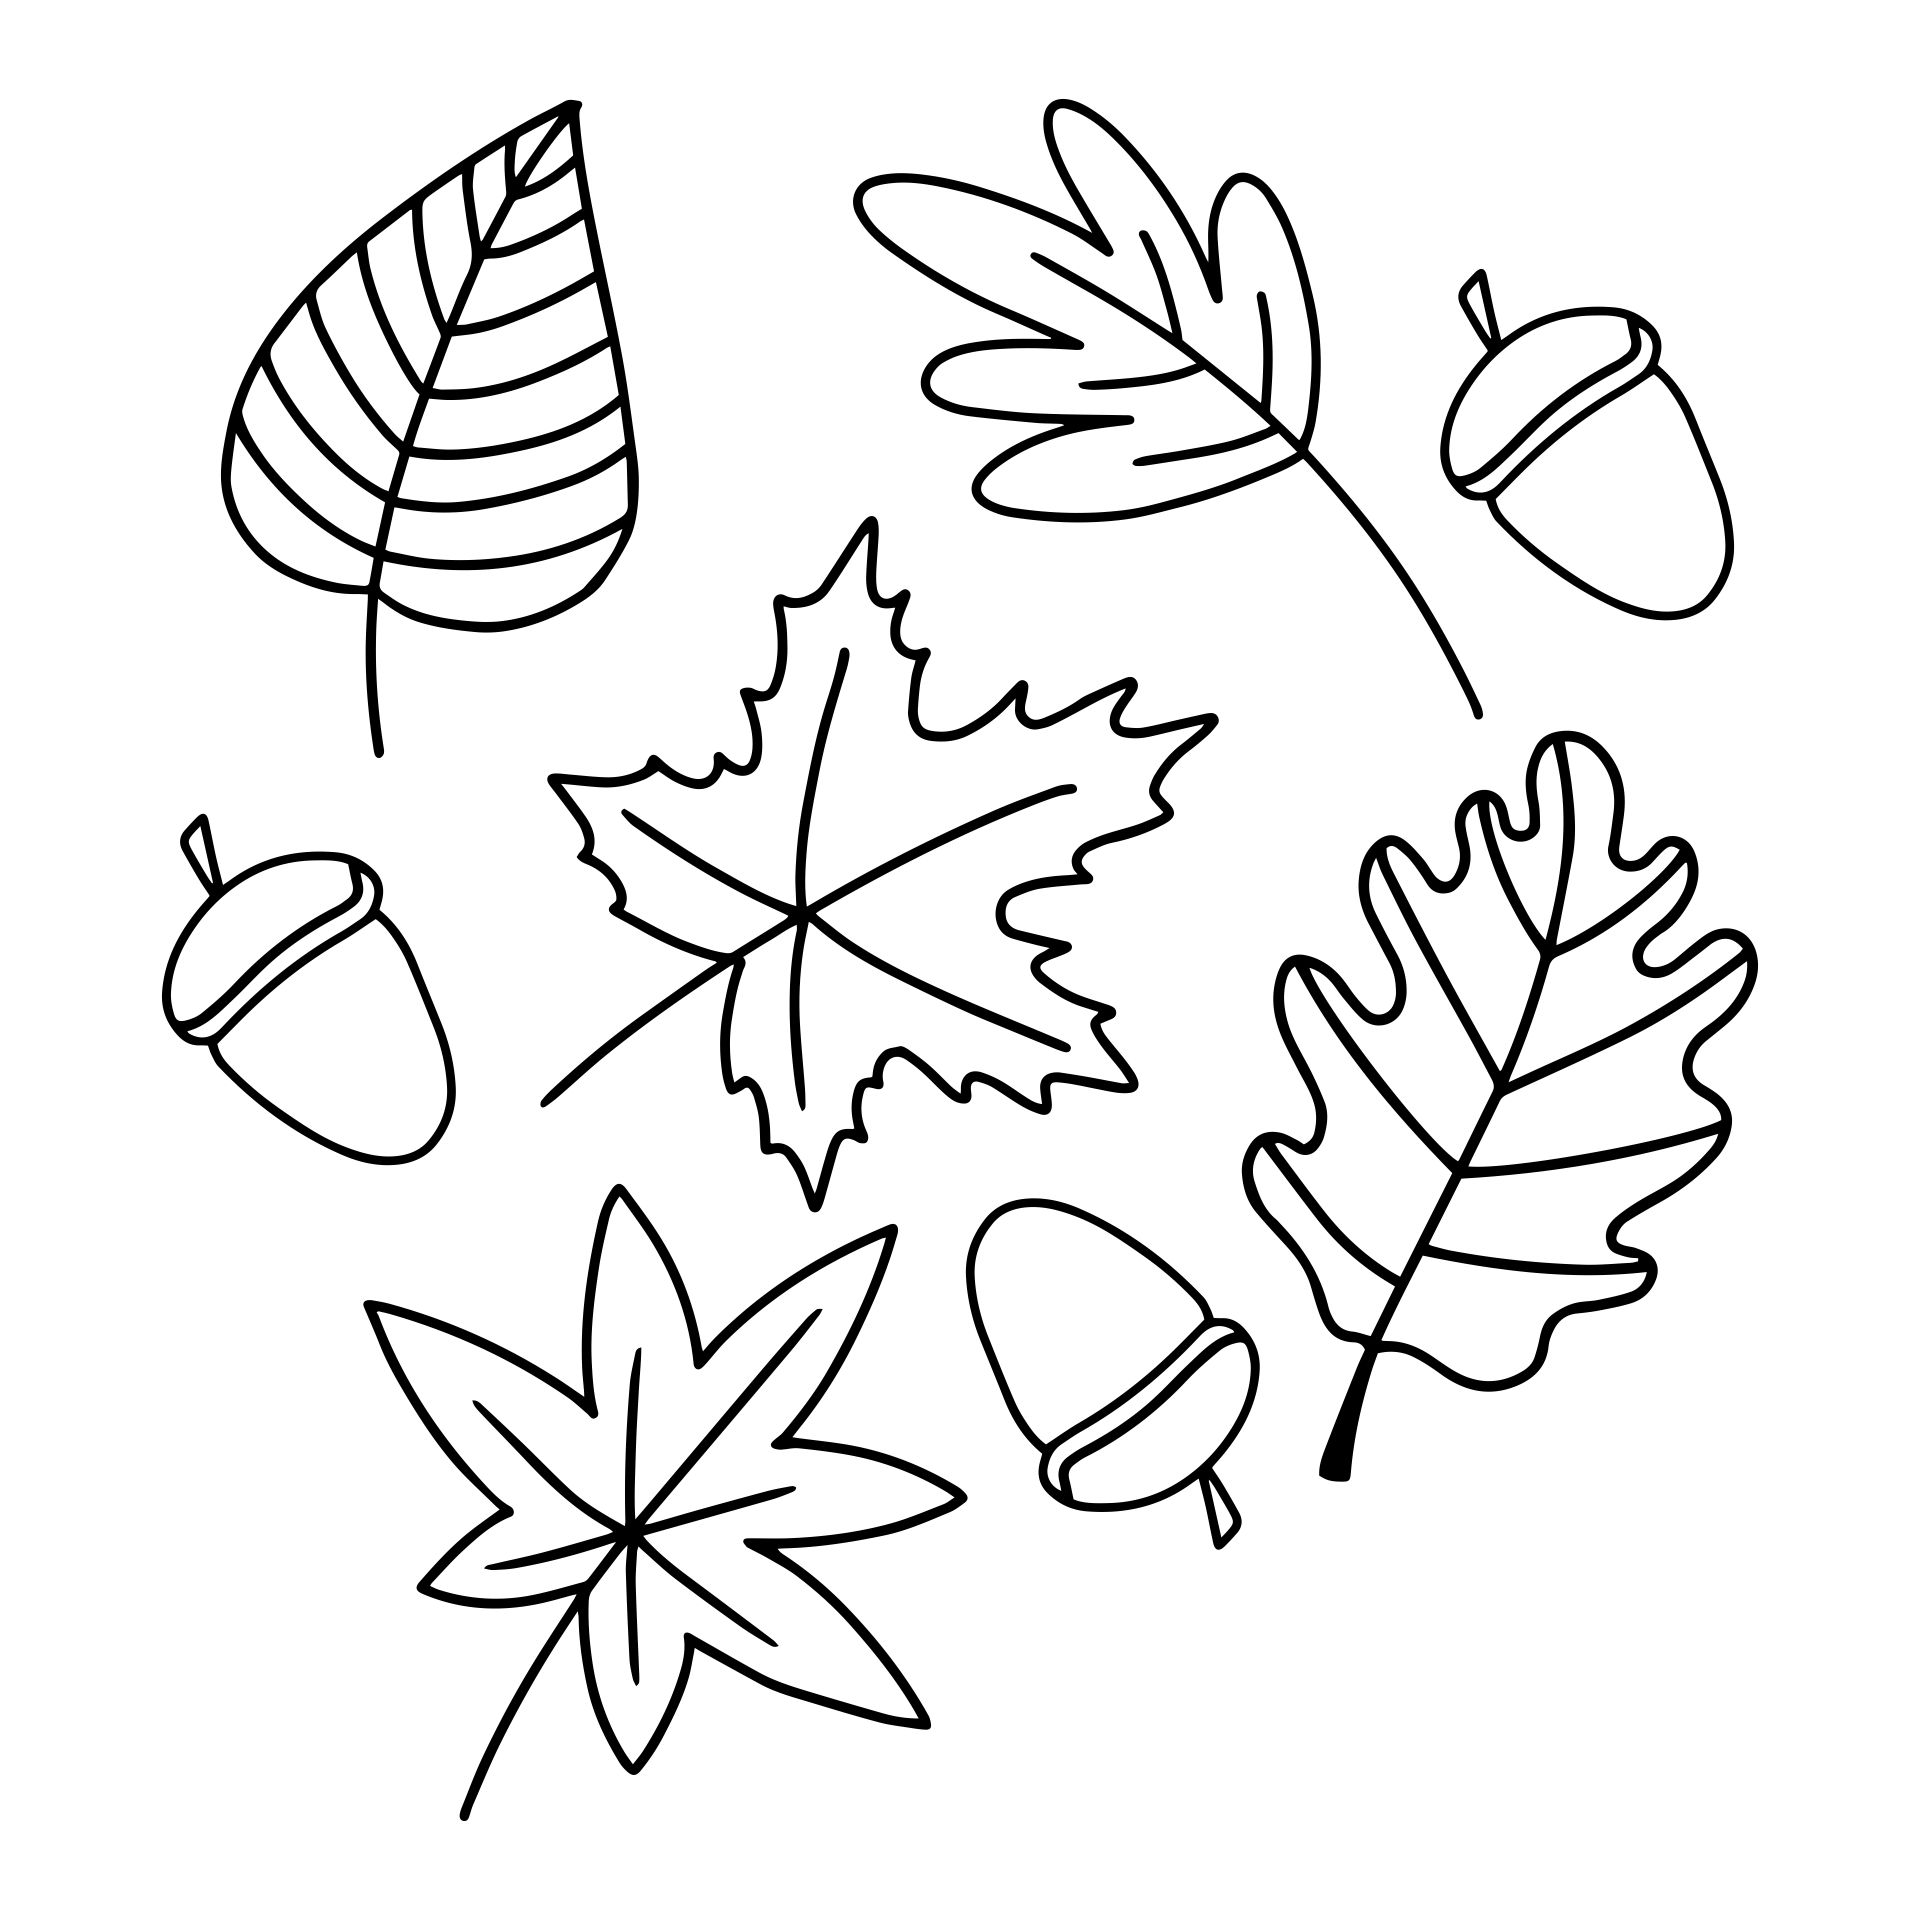 Fall Leaves And Acorn Coloring Page Printable